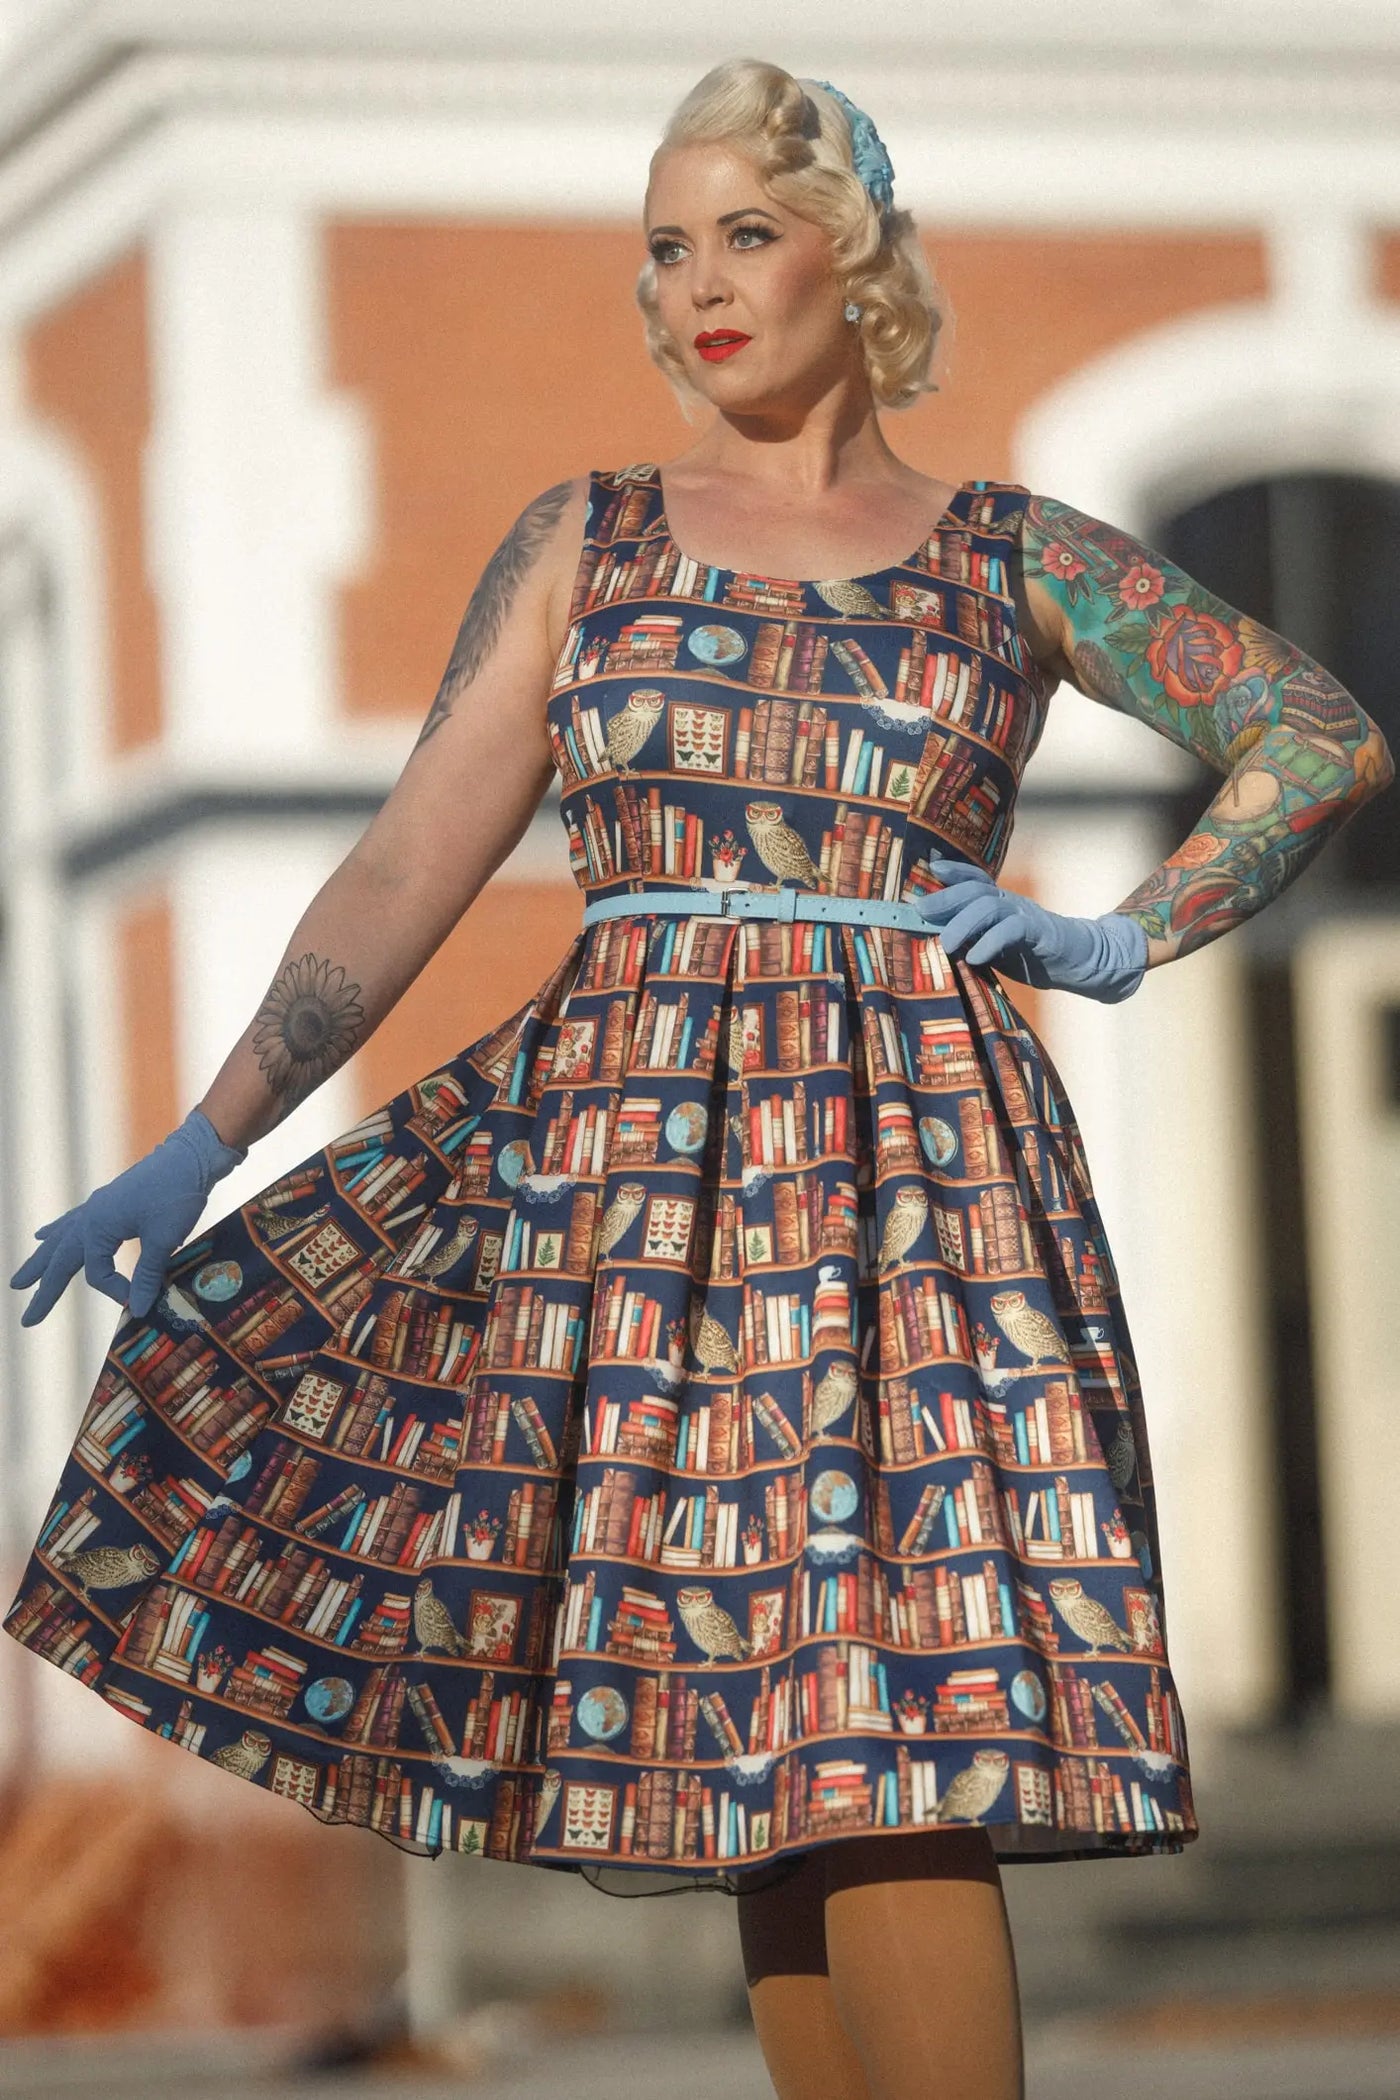 Amanda Library Book & Owl Print Swing Dress by Miss Chevy Chevelle